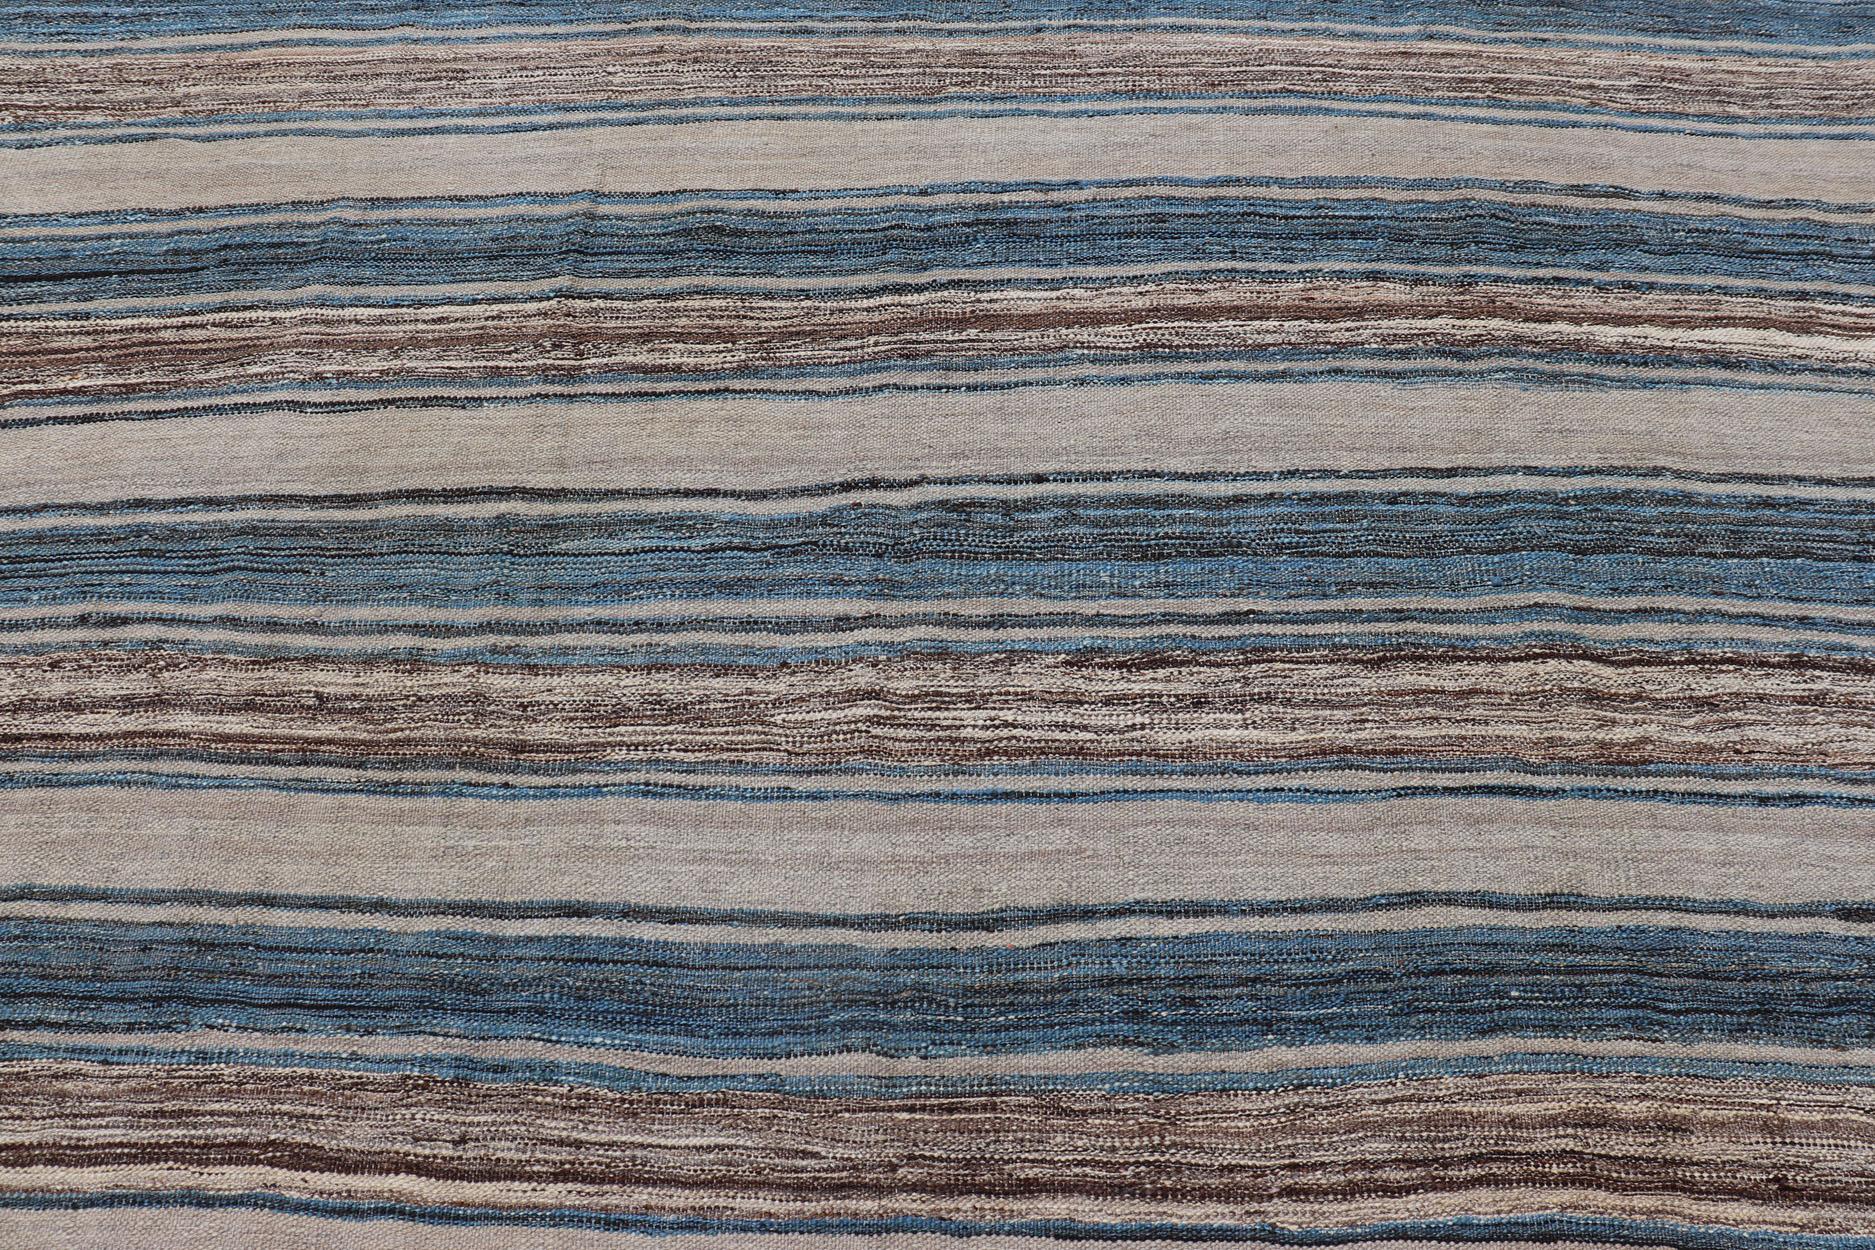 Versatile Striped Design and Natural Brown, Cream, and Blue Flat-Weave Kilim For Sale 5